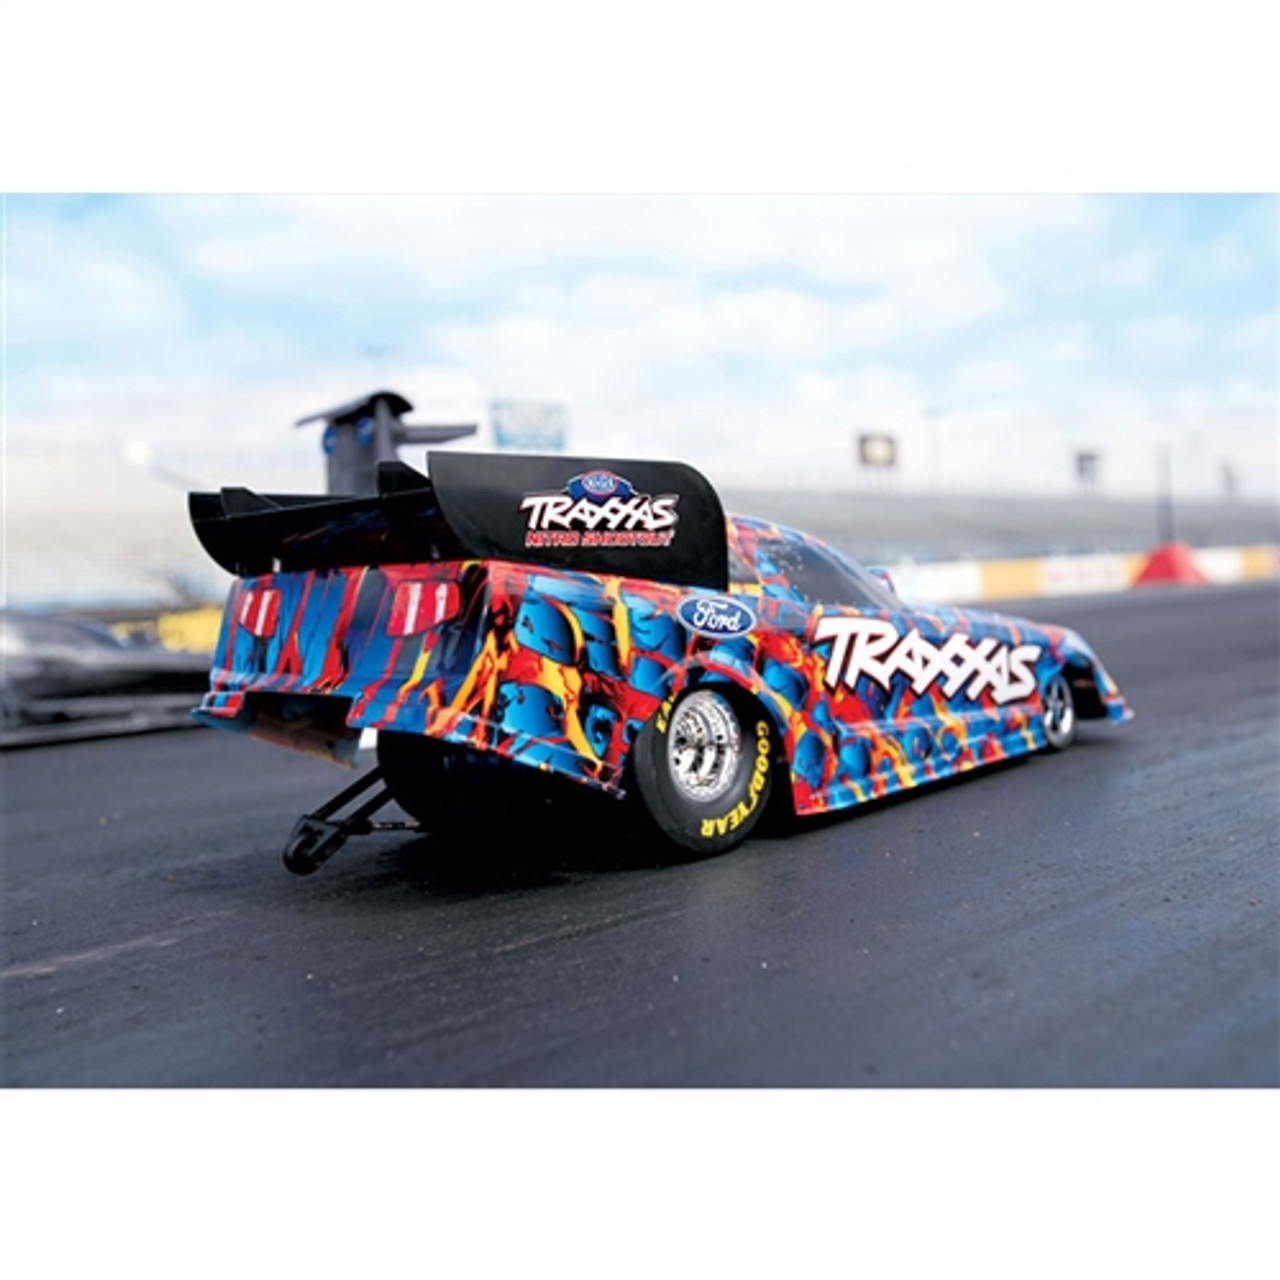 traxxas funny car front wheels